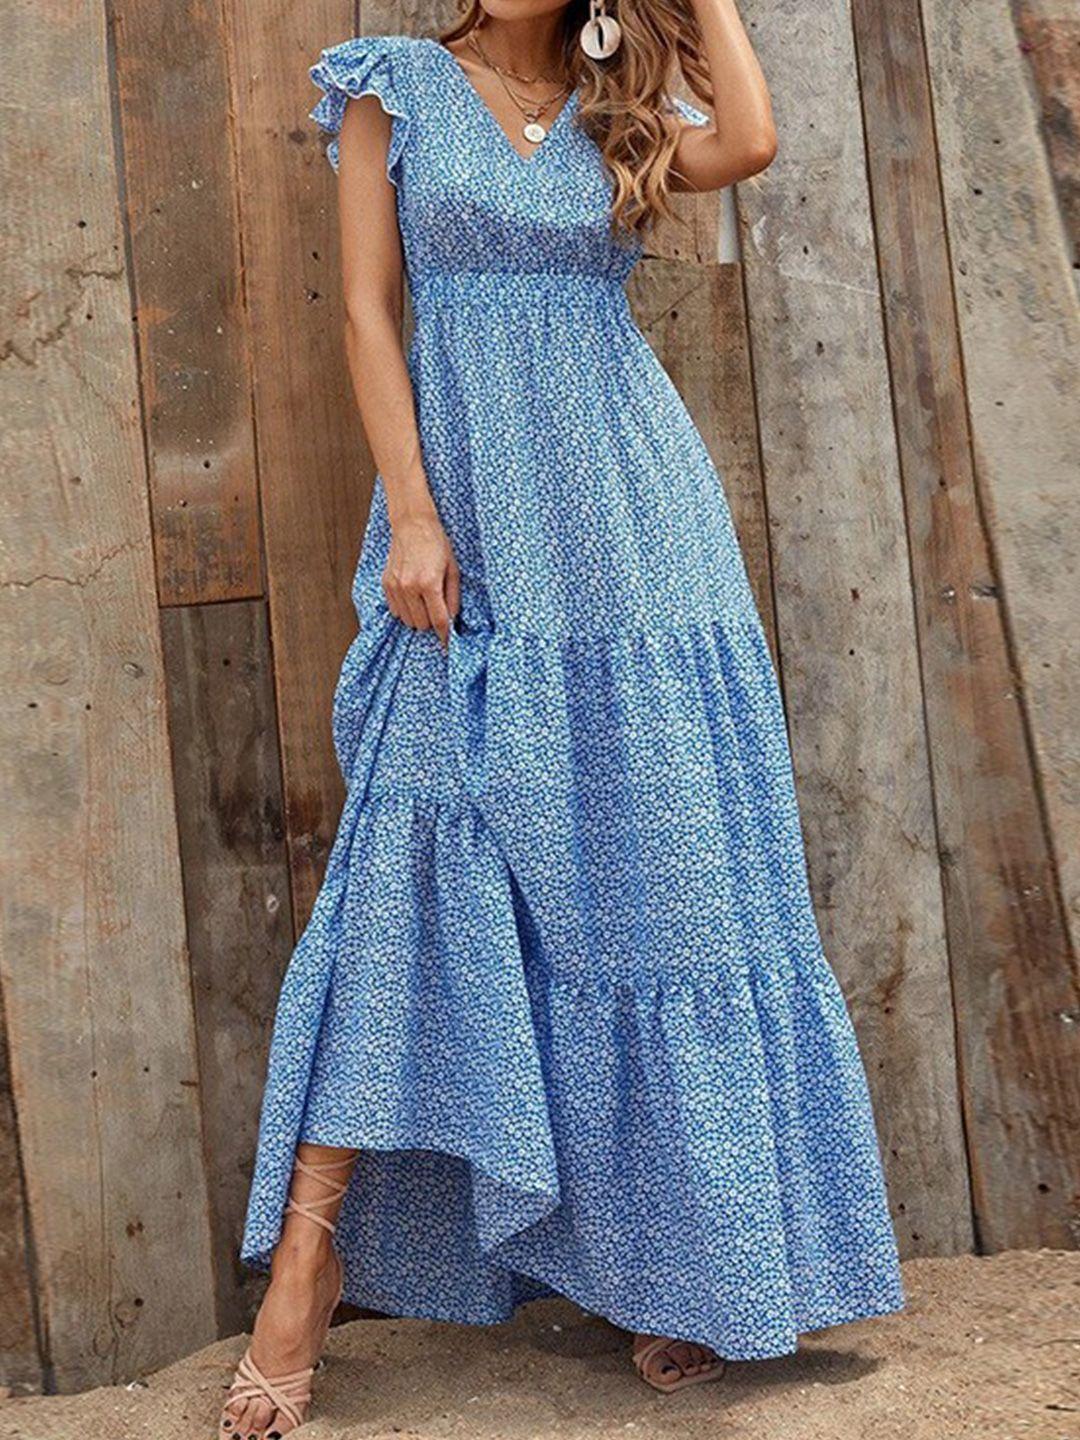 stylecast blue & white geometric printed flutter sleeves maxi fit and flare dress